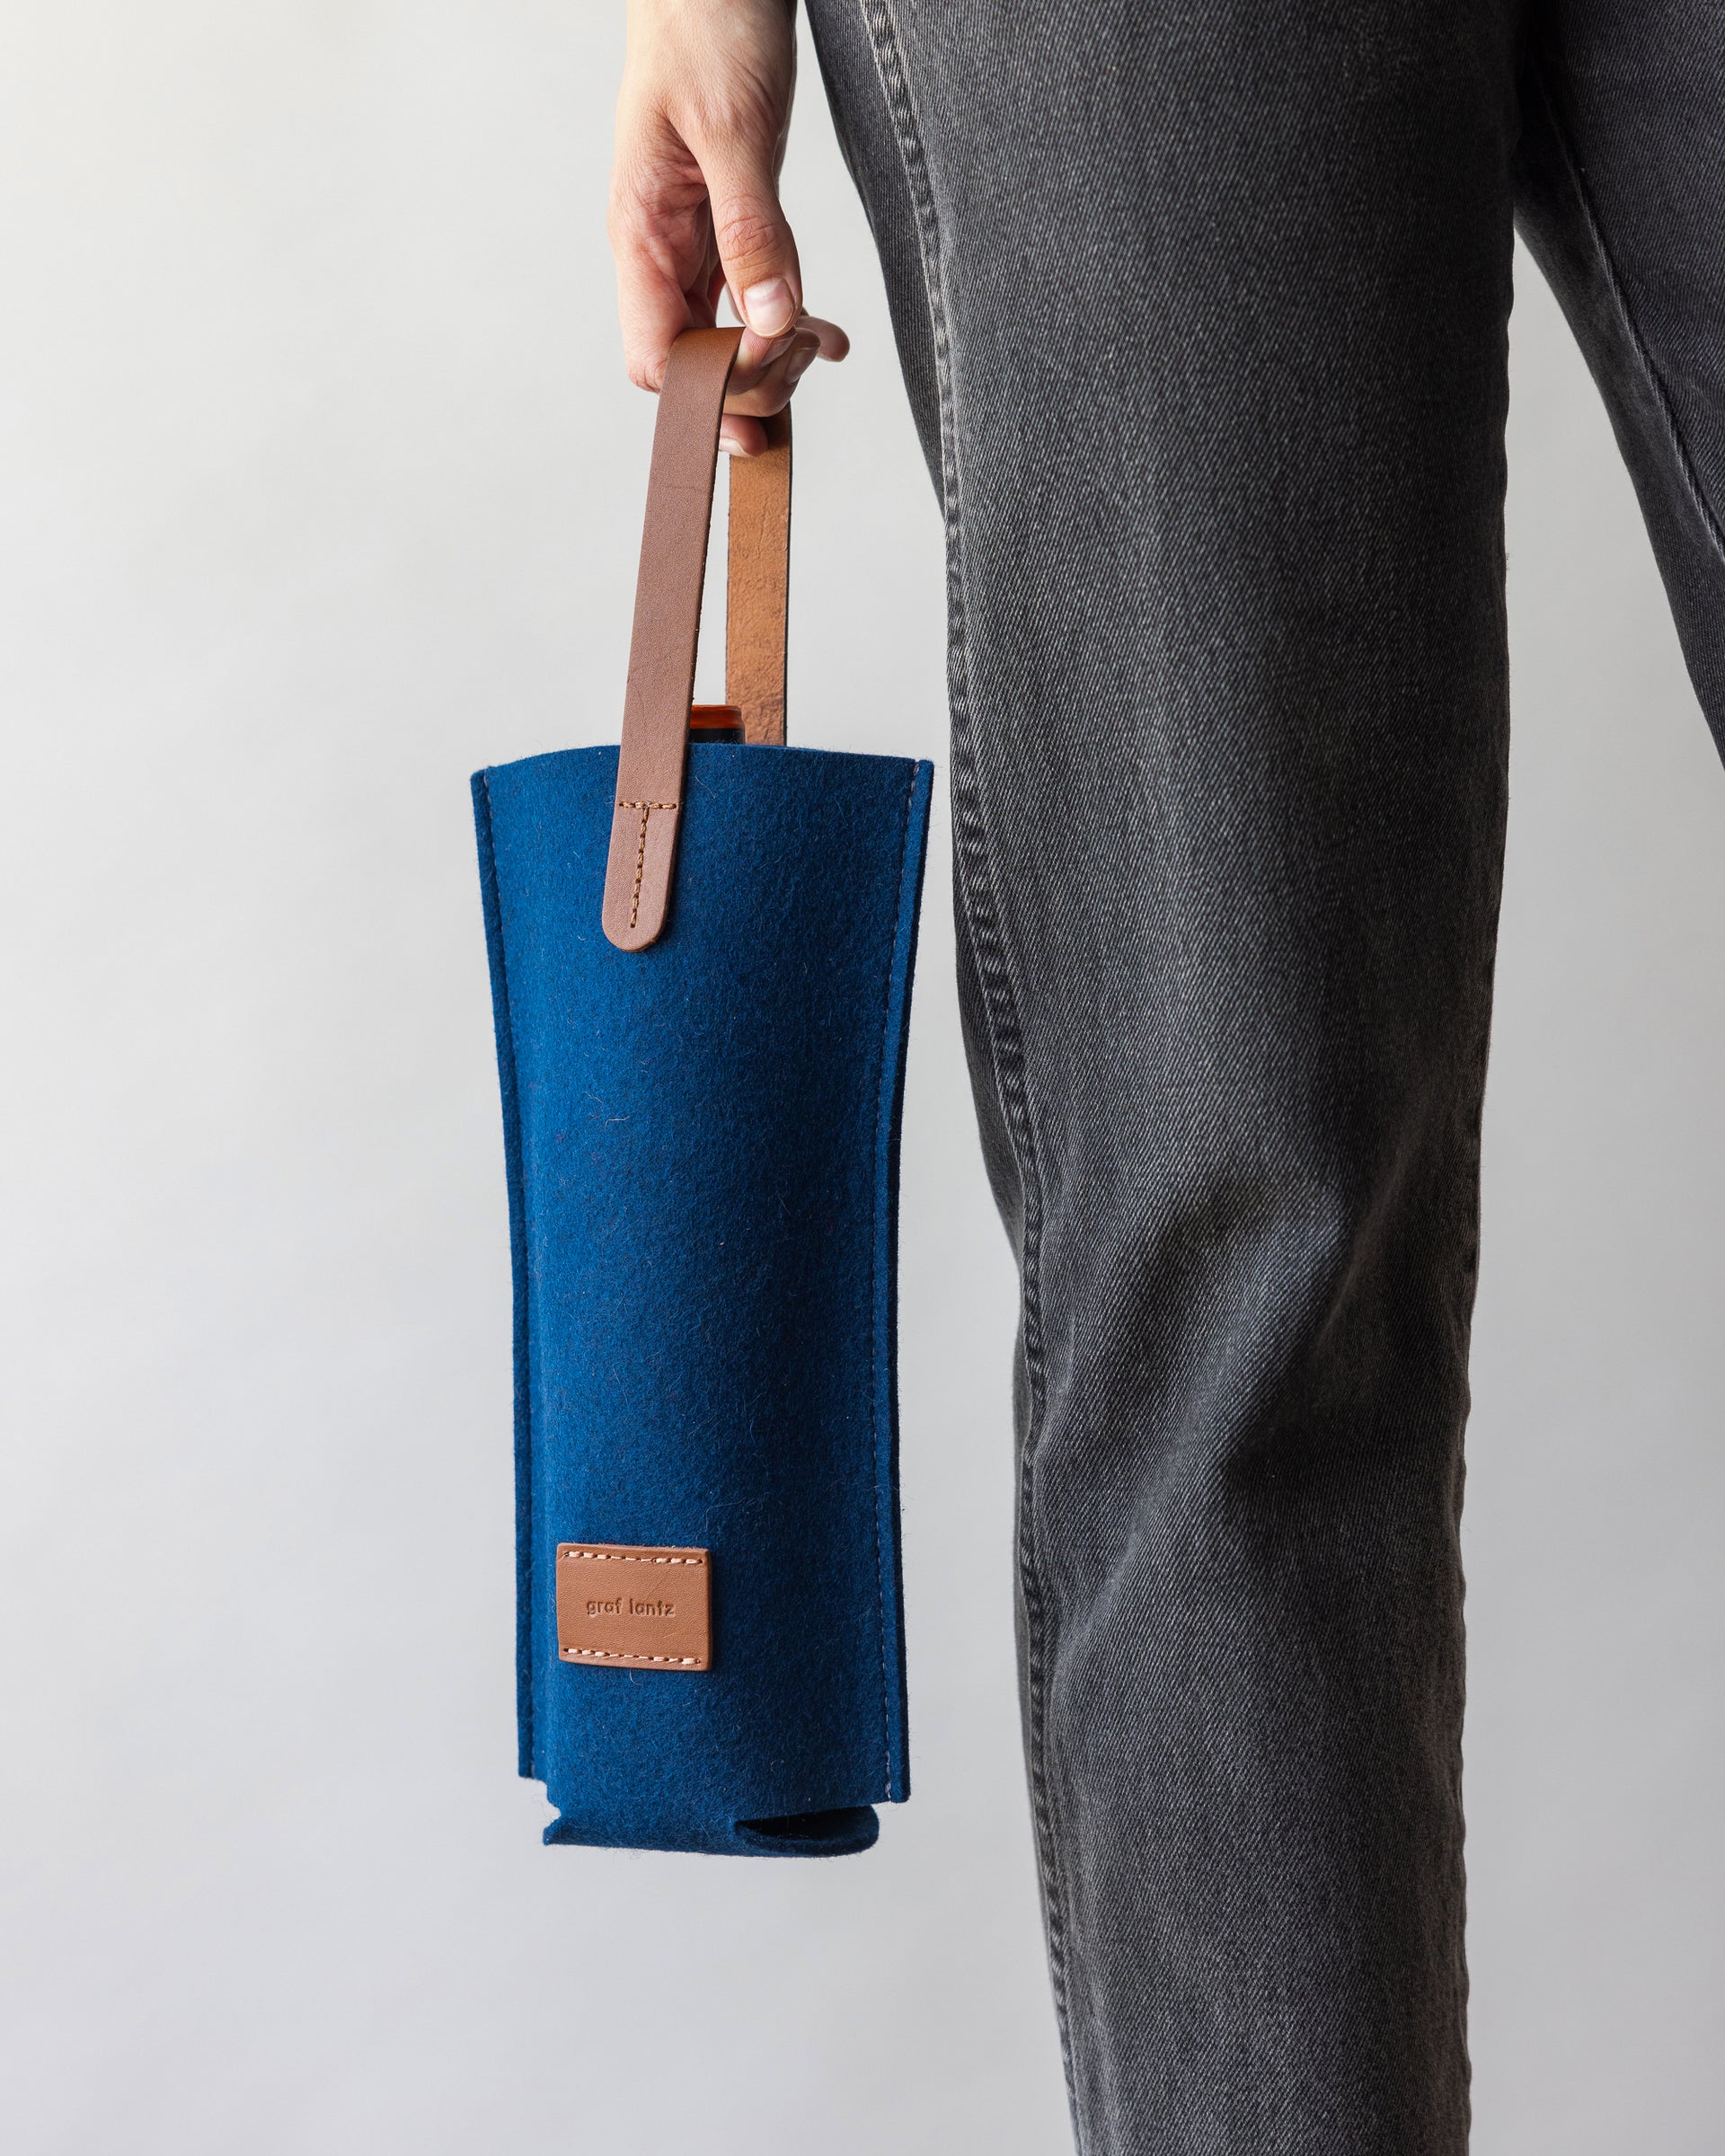 A woman holding a Merino Wool Felt Single Wine Carrier in blue with a brown leather handle, front view